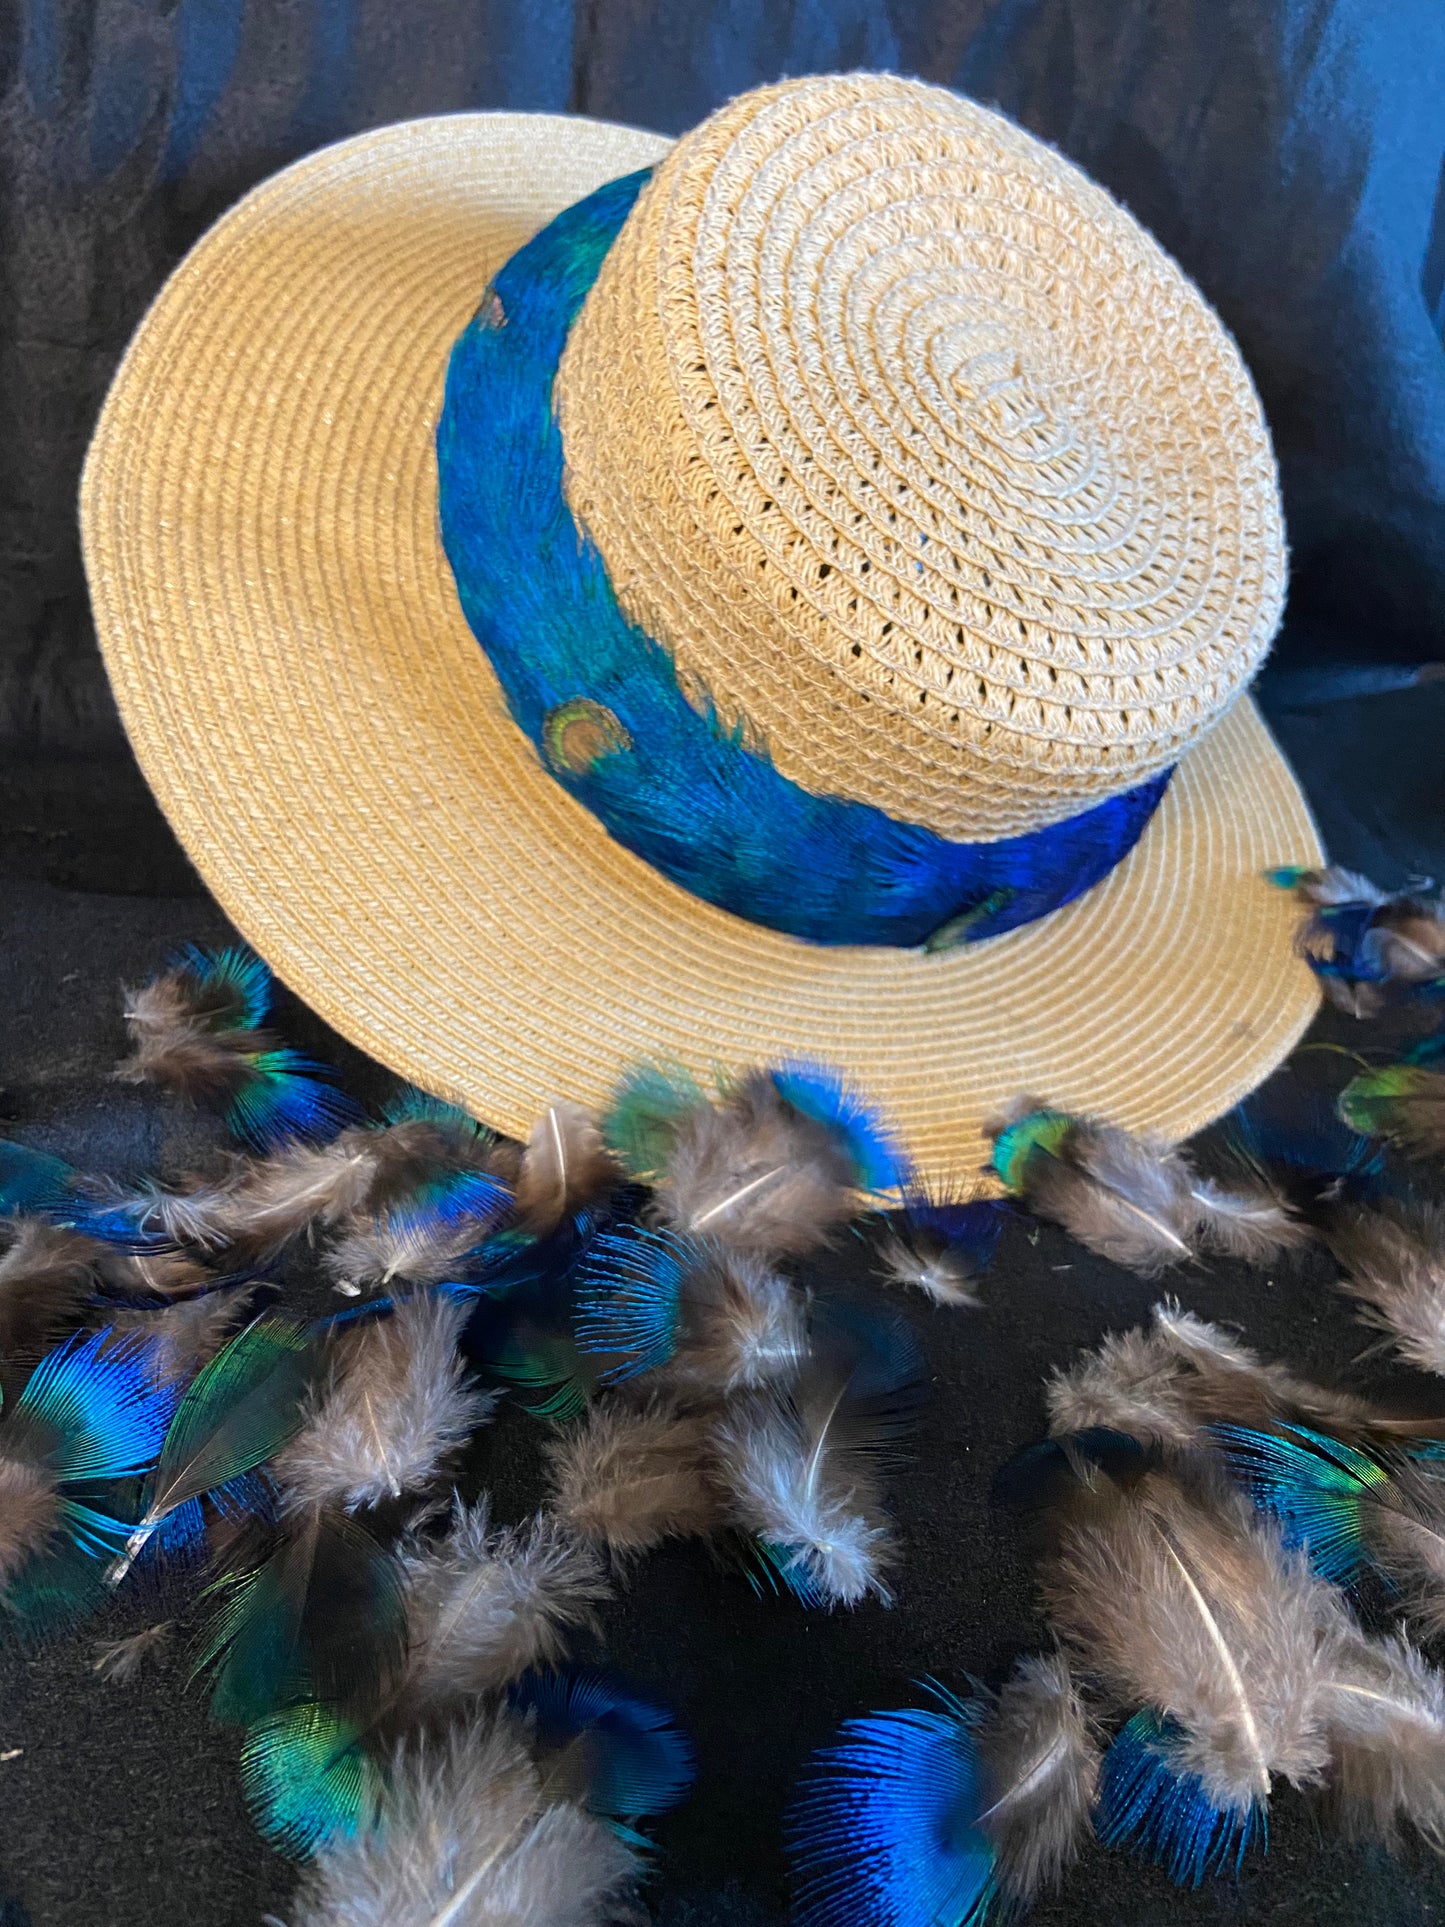 Blue Peacock Humu Papale (feather hat band) with gold peacock accents